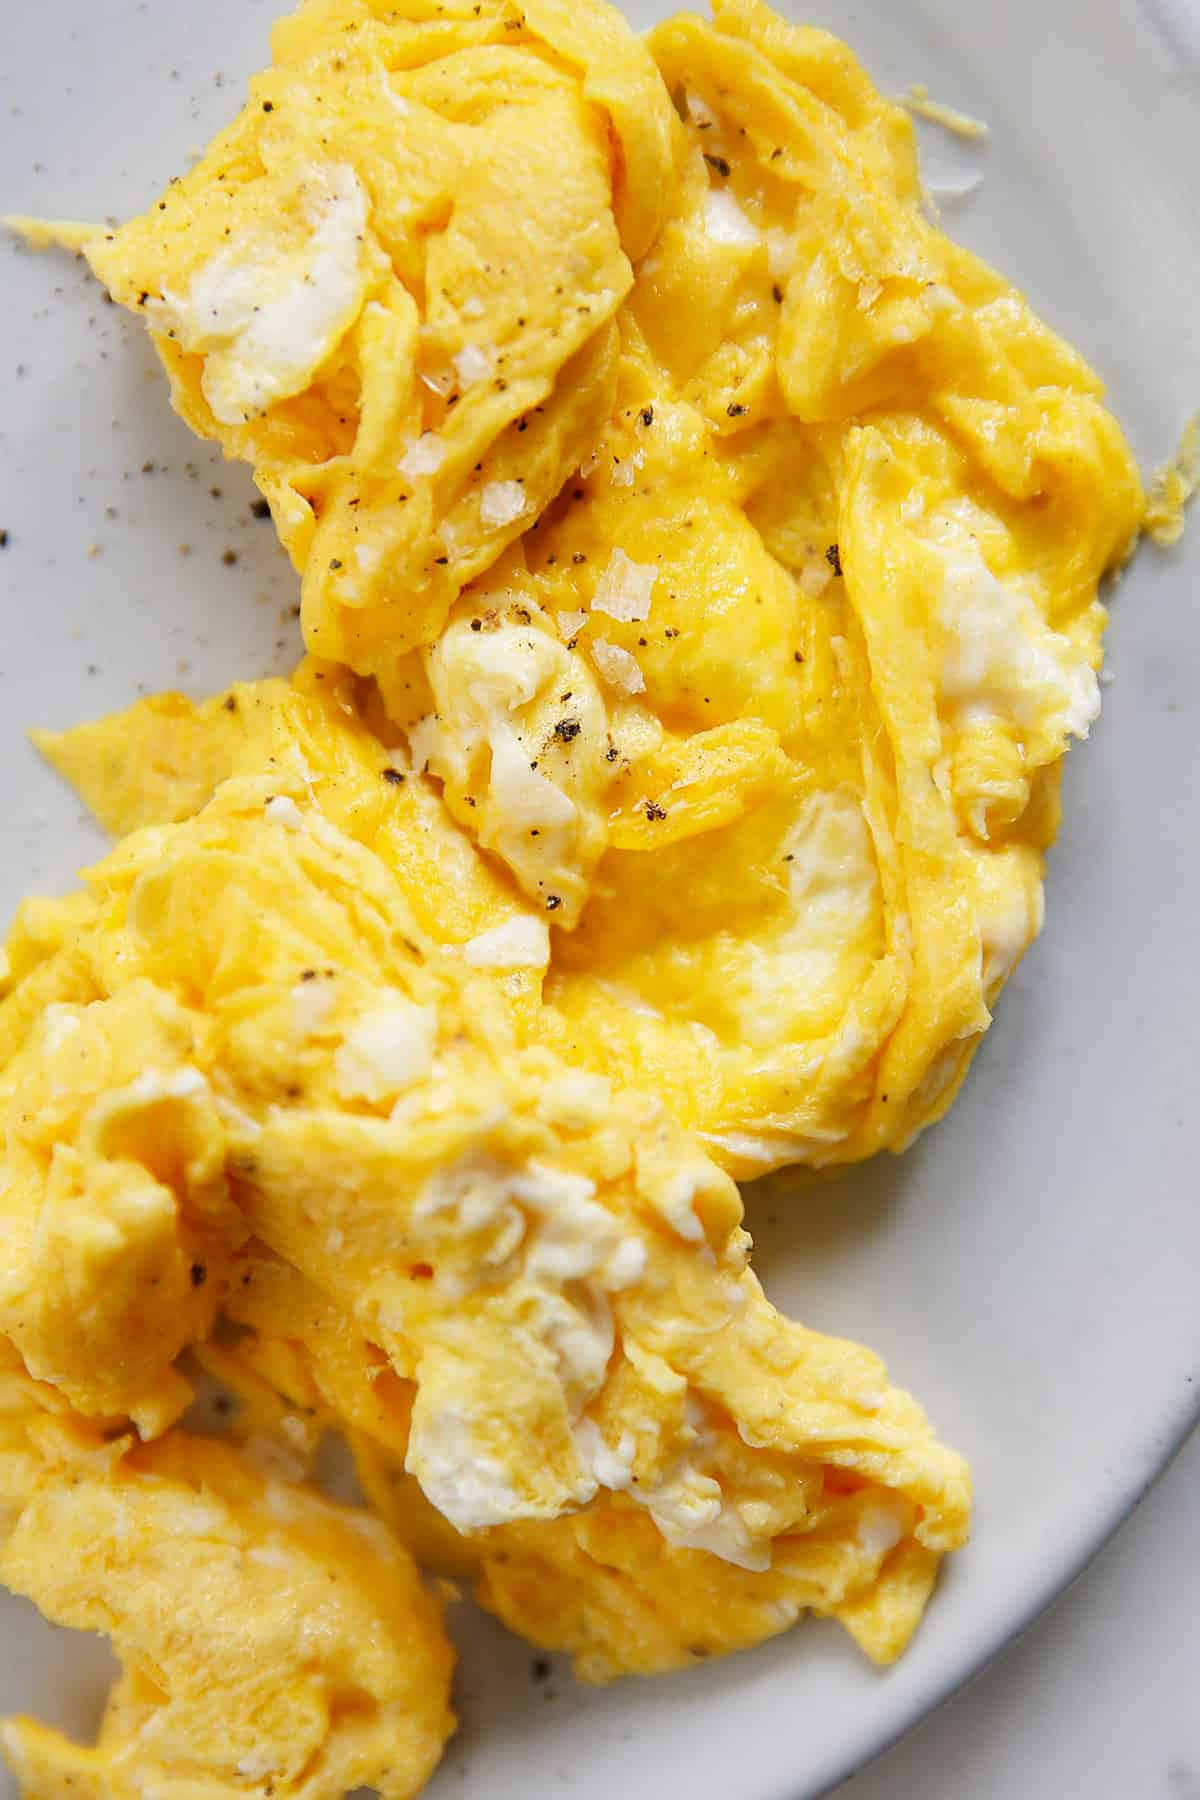 "Treat yourself to a delicious plate of scrambled eggs!"